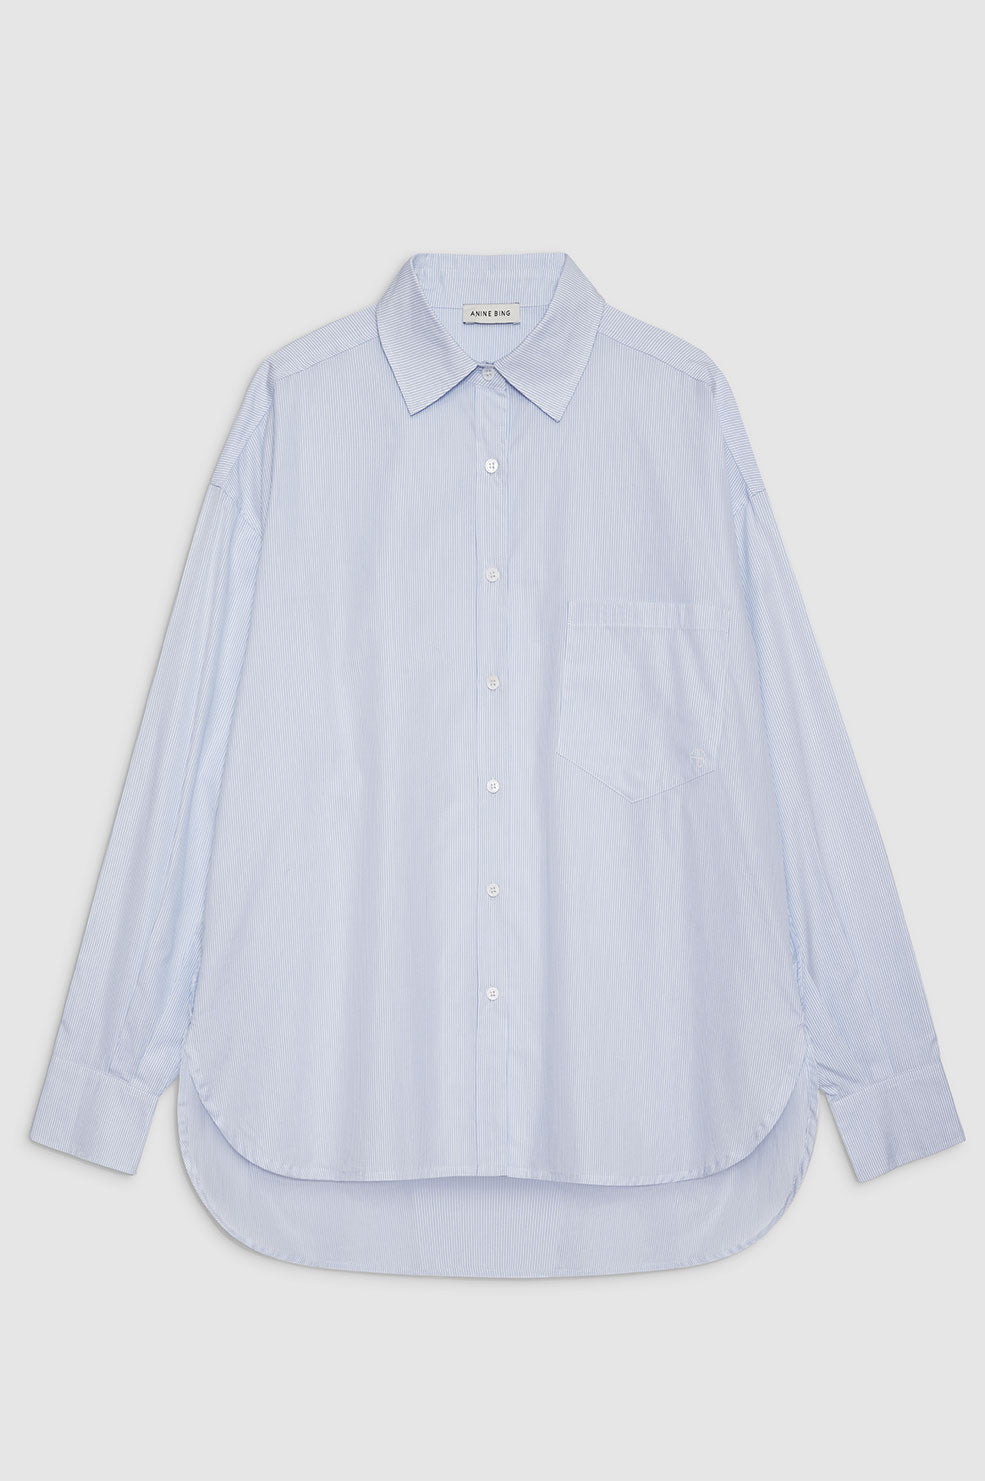 ANINE BING Chrissy Shirt - Blue And White Stripe - Front View